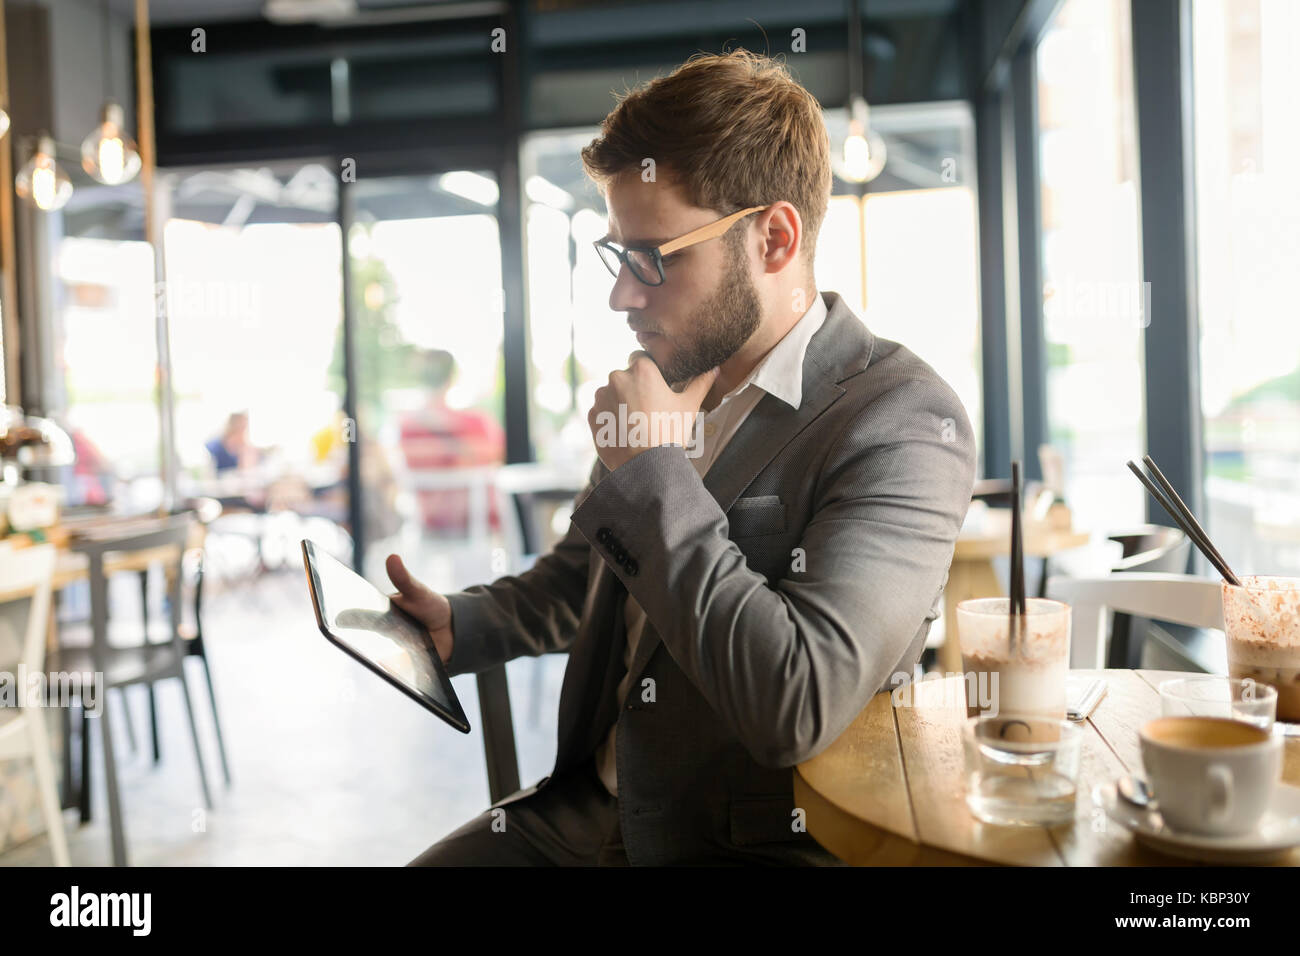 Businessman using tablet in cafe Stock Photo